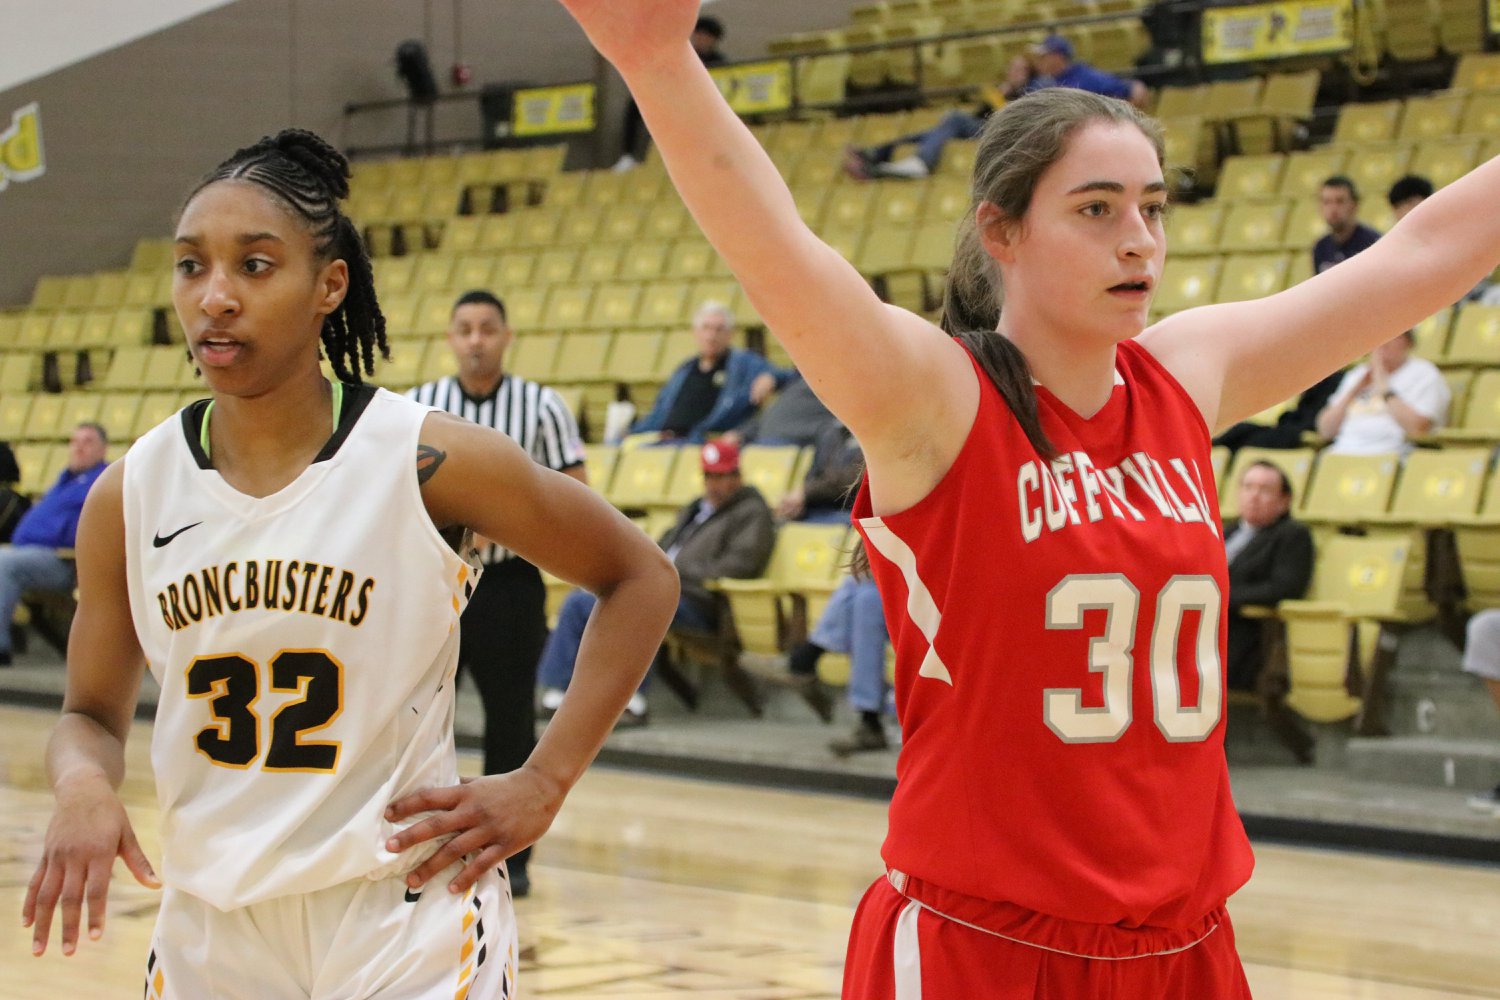 Tilley's double-double leads Garden City past Coffeyville